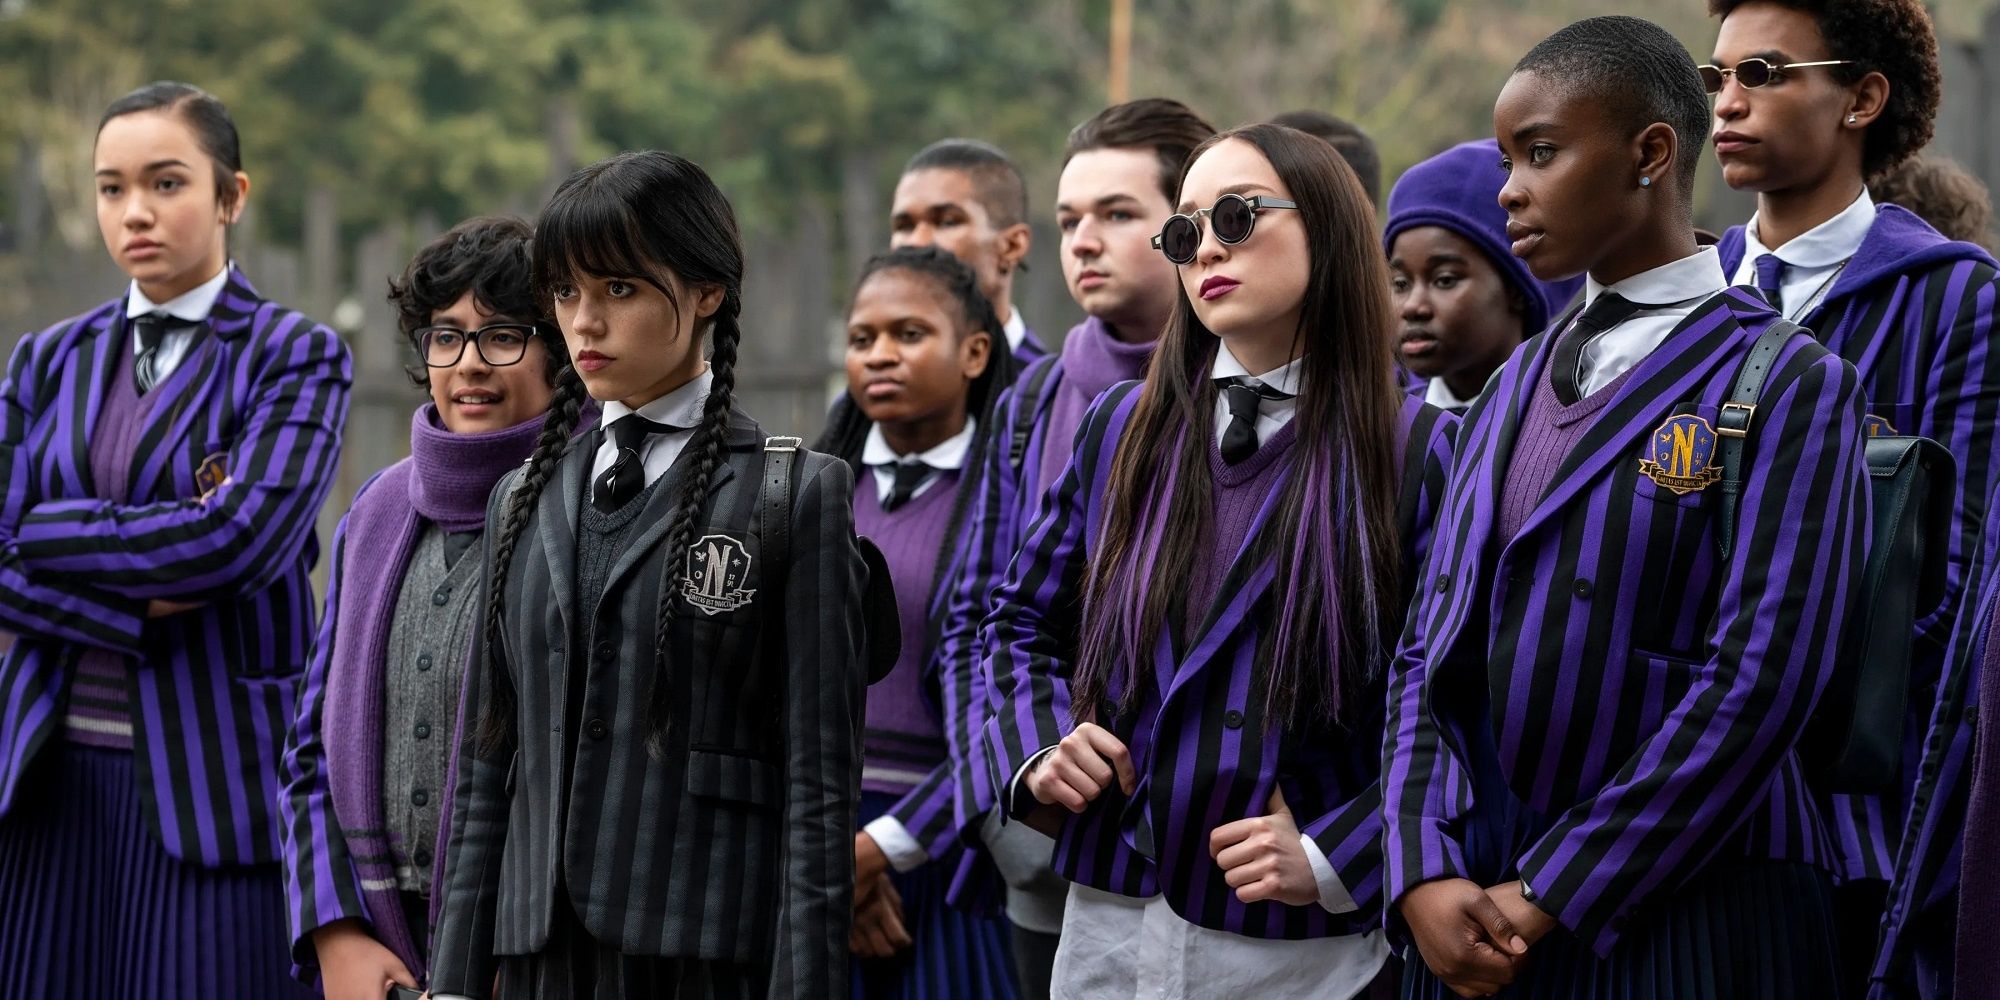 Wednesday Addams with her peers at Nevermore Academy in 'Wednesday.'